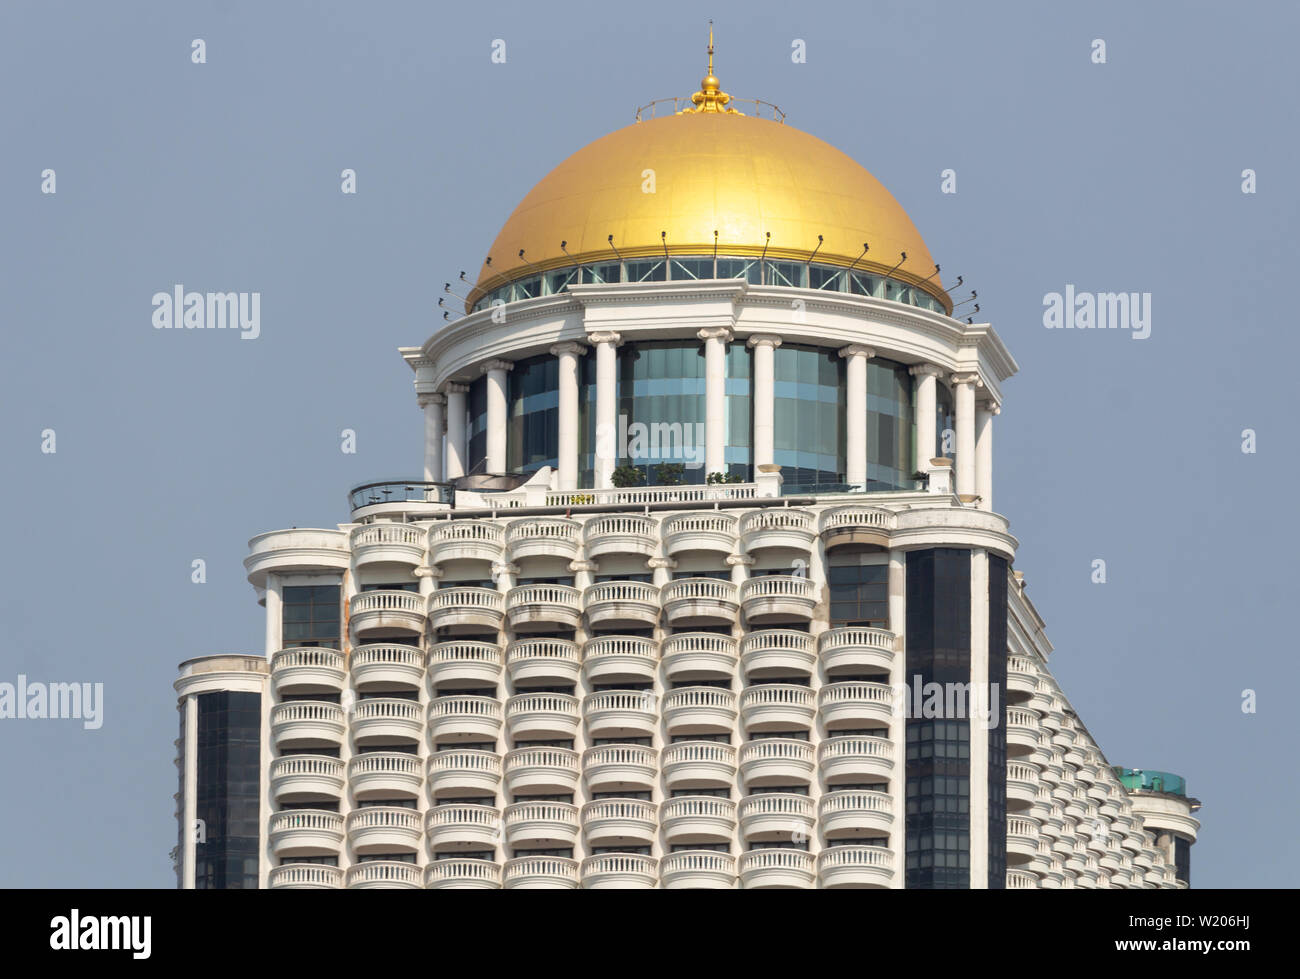 Bangkok, Thailand - April 14, 2019: State tower skyscraper with golden dome Stock Photo